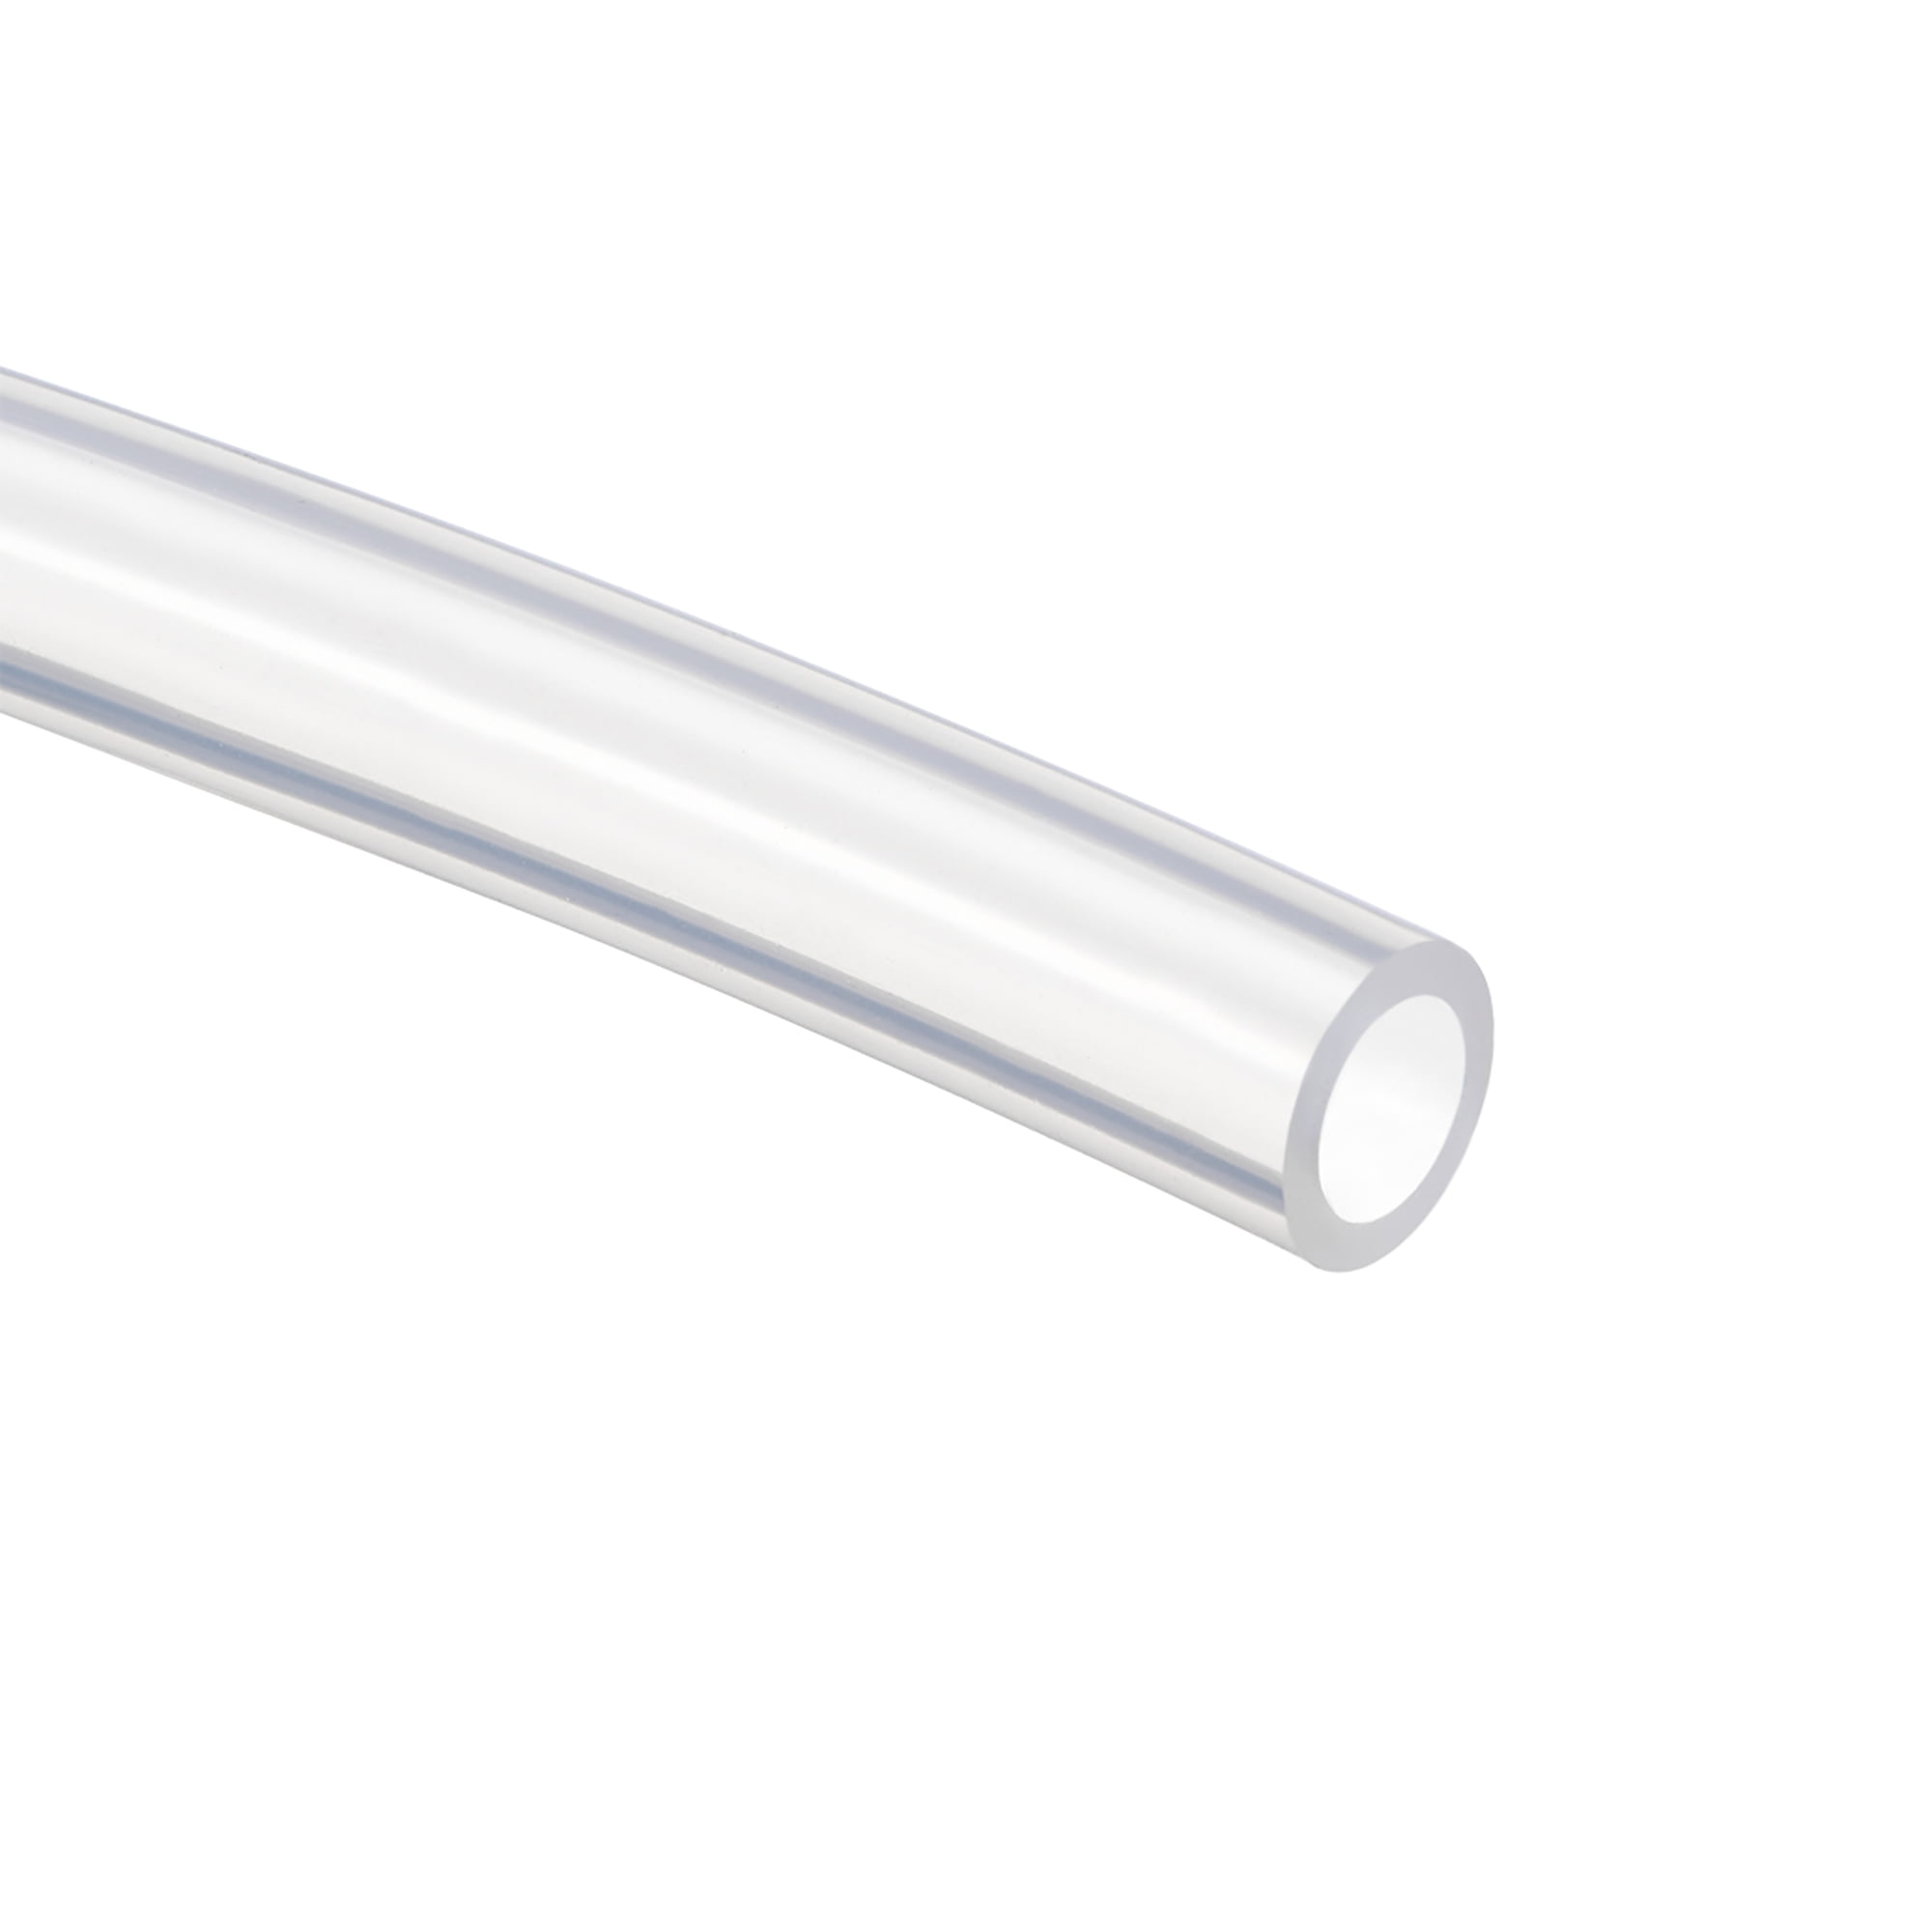 Details about   Silicone Tube 3/16 inch ID x 1/4 inch OD 1m/3.3ft Tubing White 